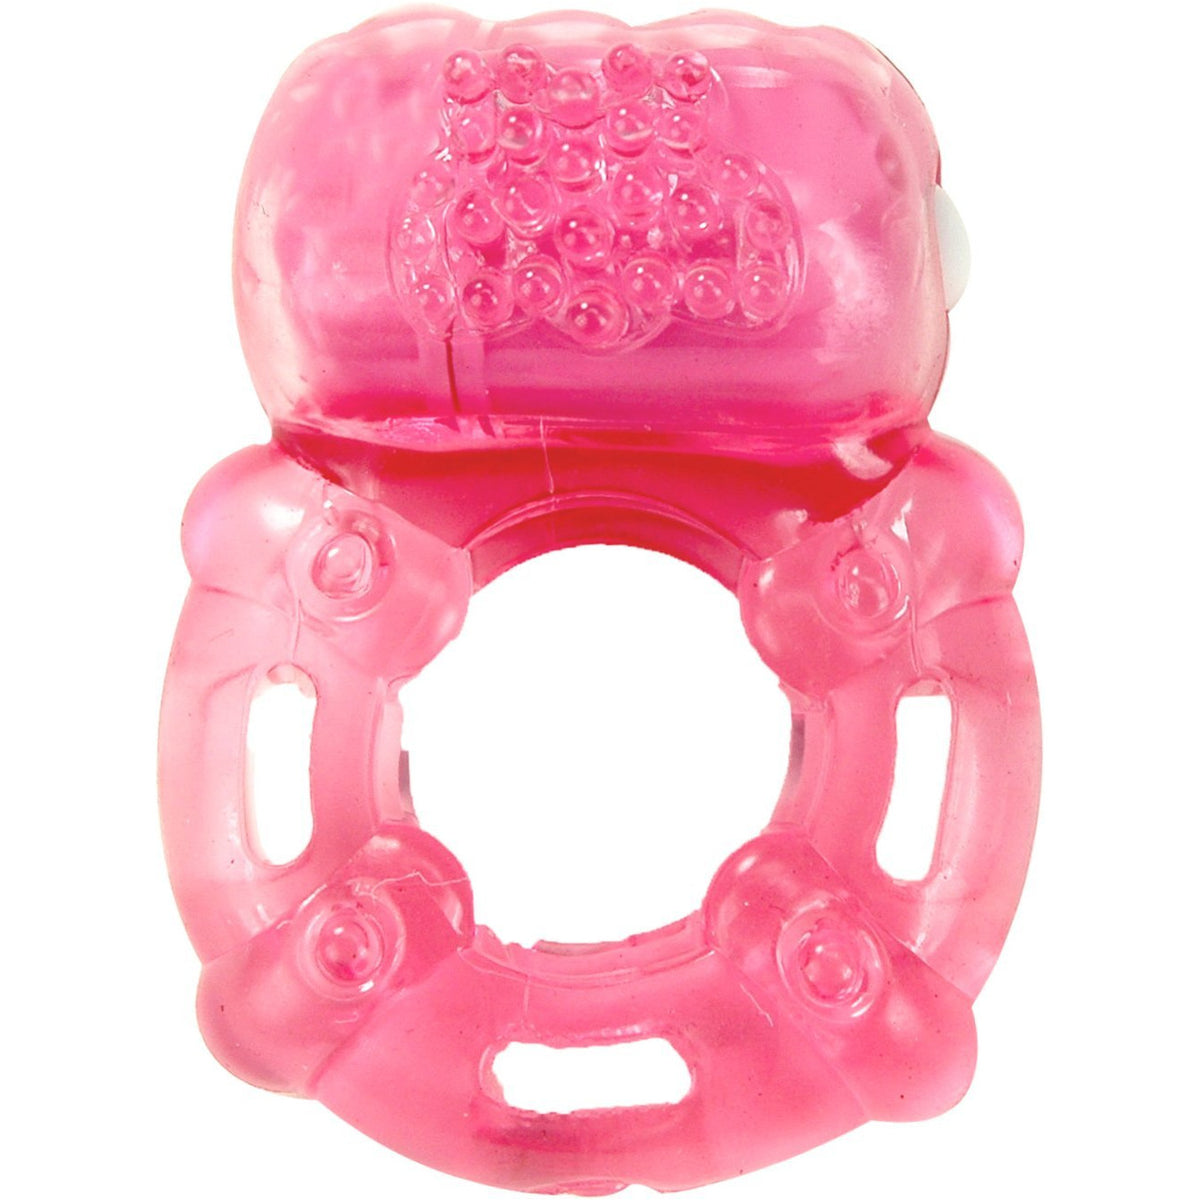 HottProducts Super Stud Orgasmix Ring - Cock Ring